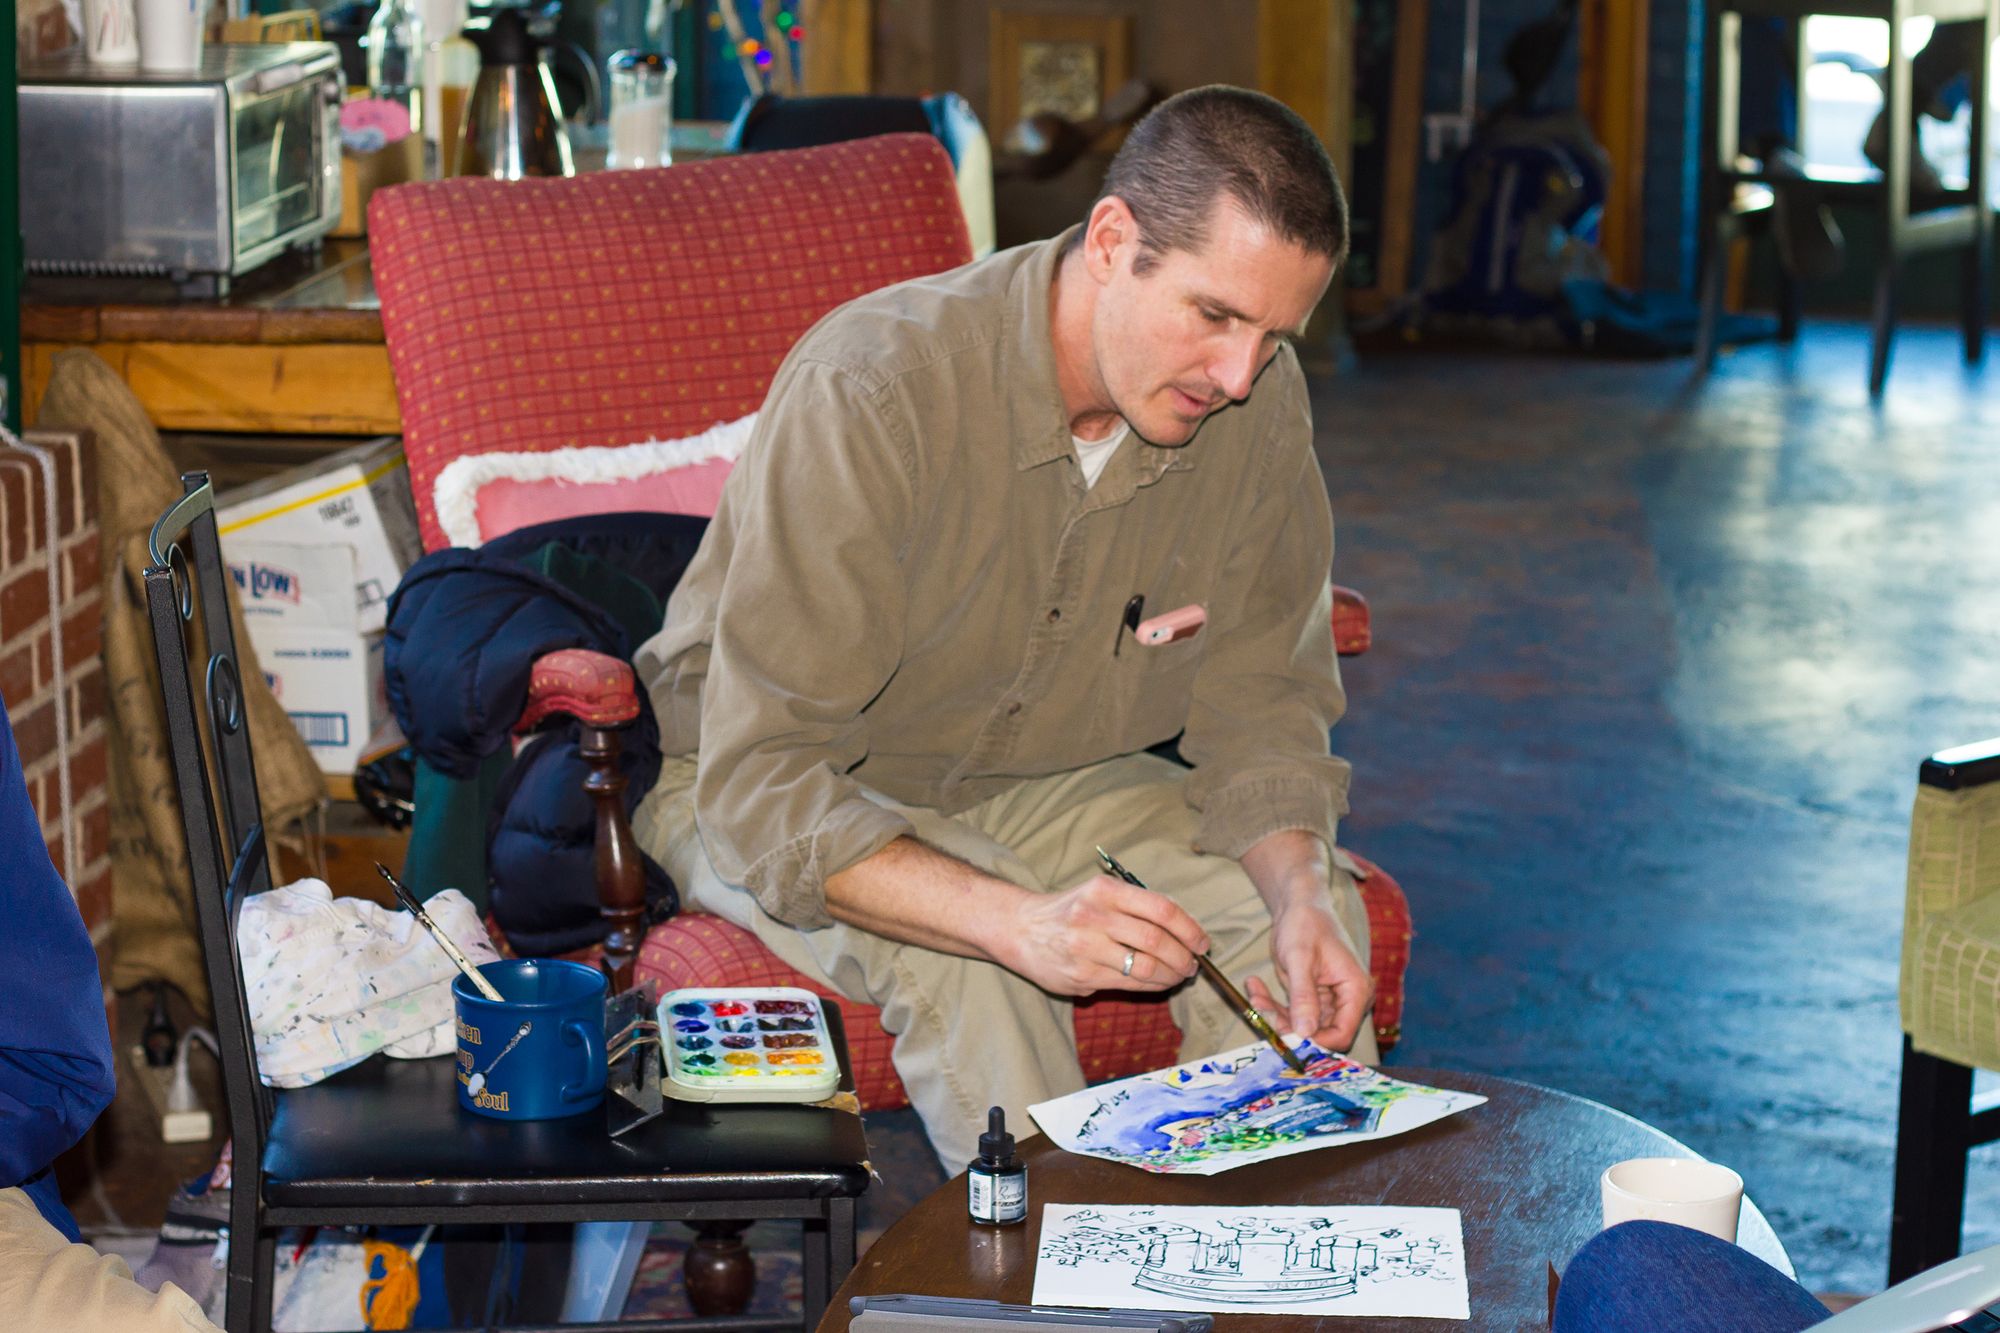 Artist Jamie Calkin as he works on a small painting.